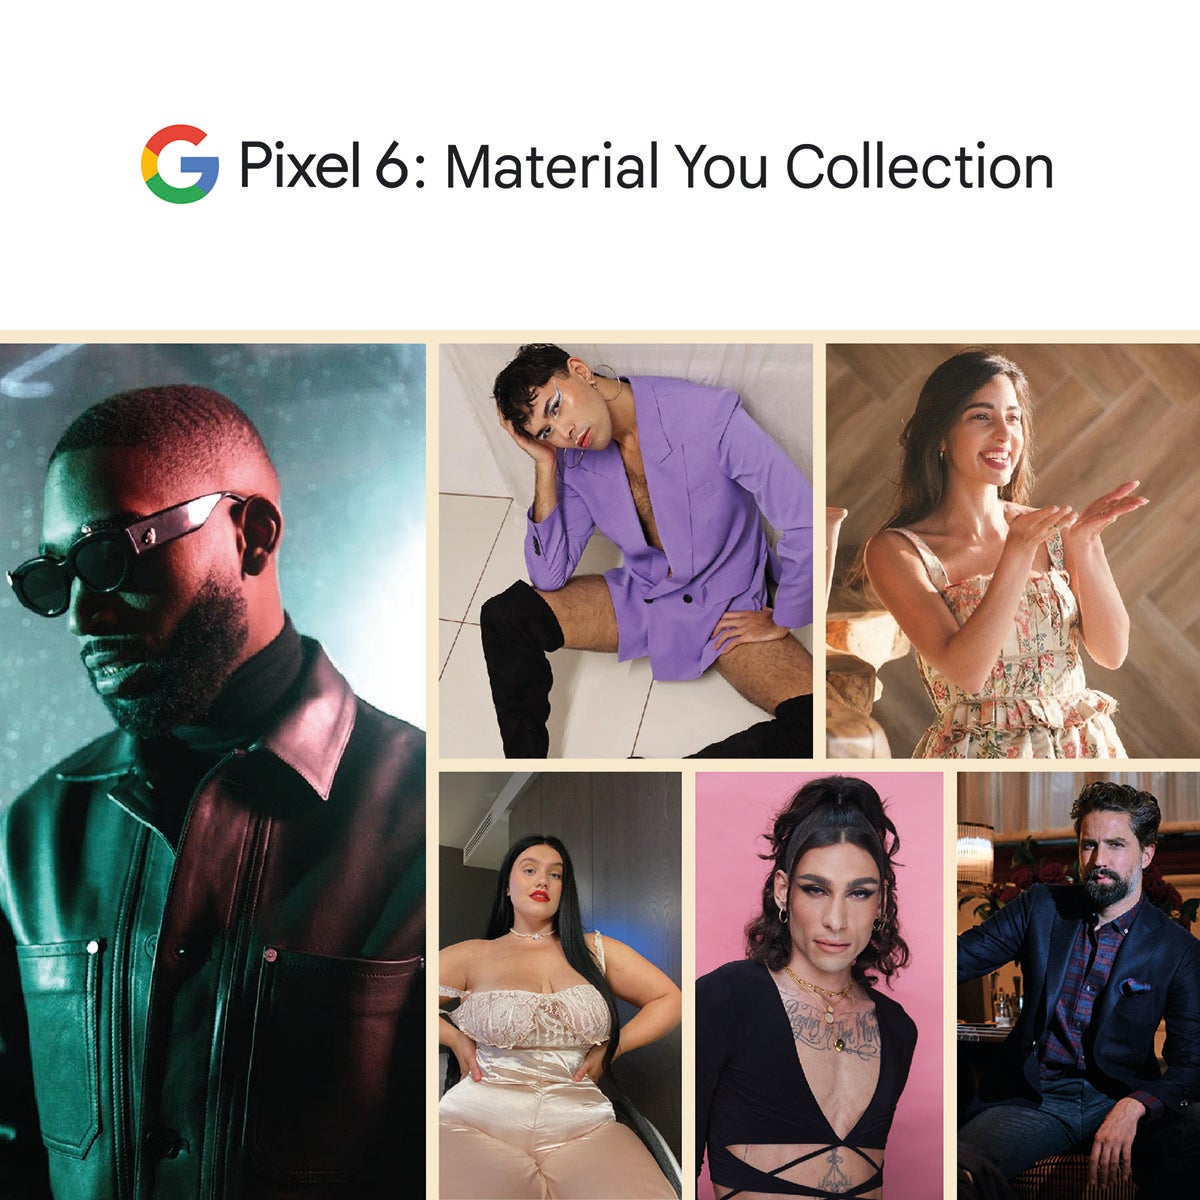 Google's Material You digital fashion collection inspired by the Pixel 6 series - Google dabbles in digital fashion with the 'Pixel 6: Material You' collection